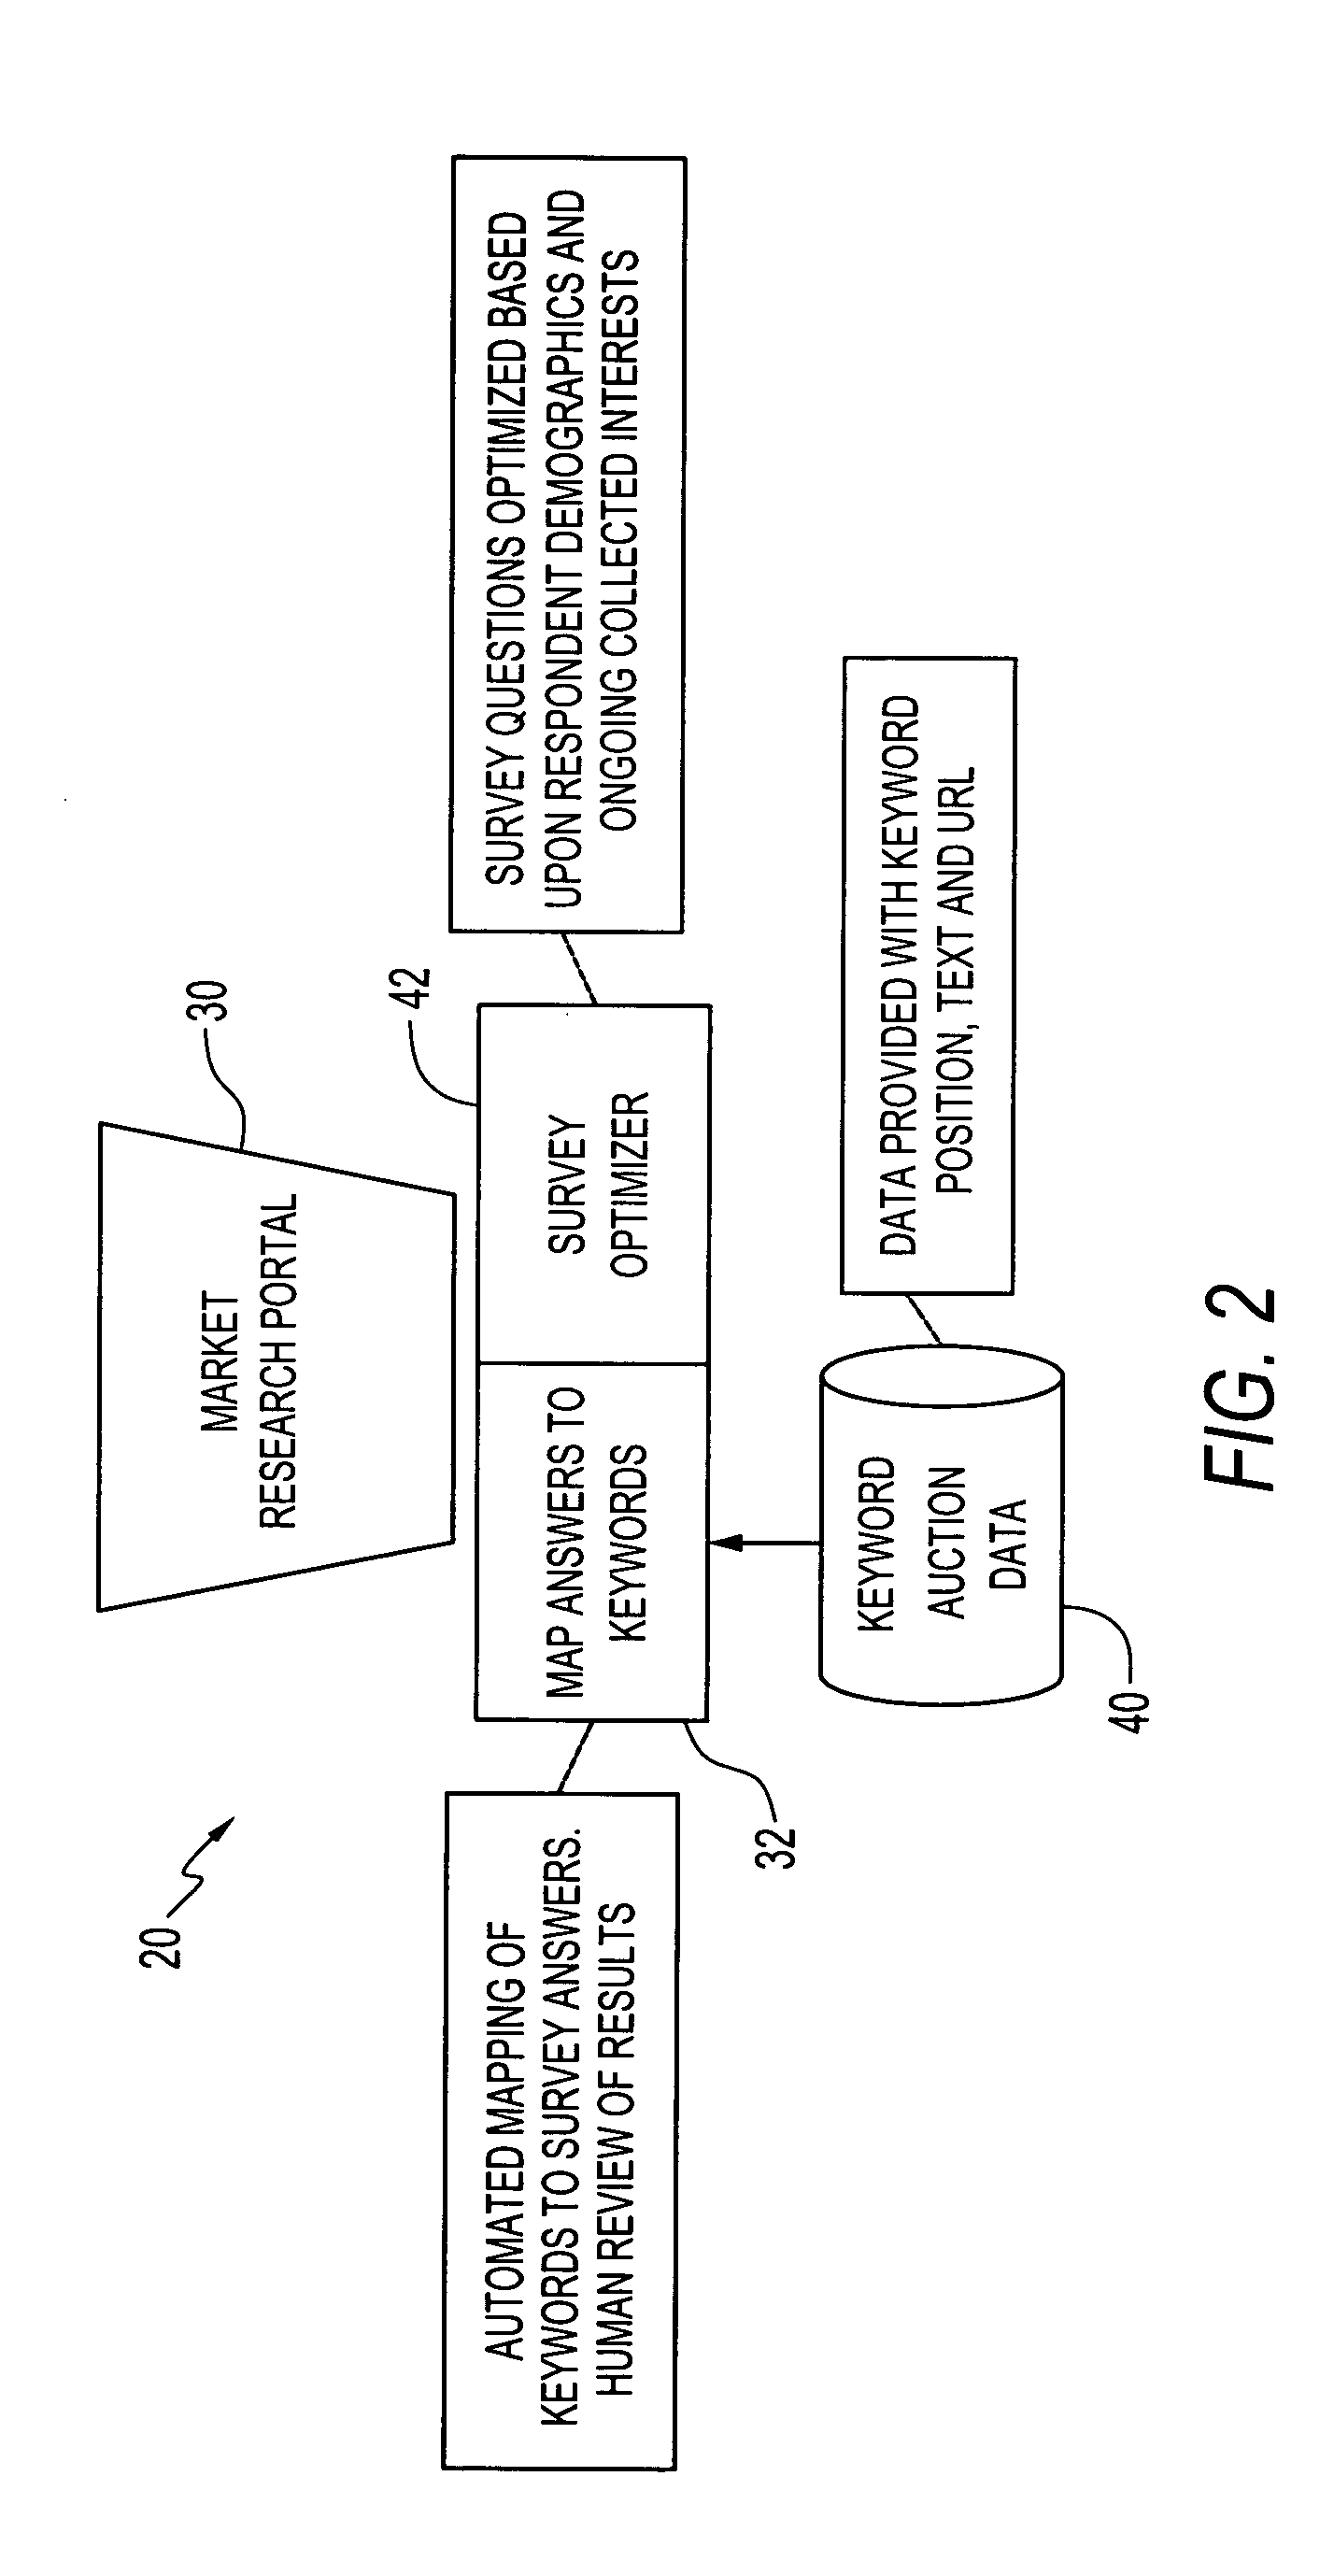 Interactive online research system and method